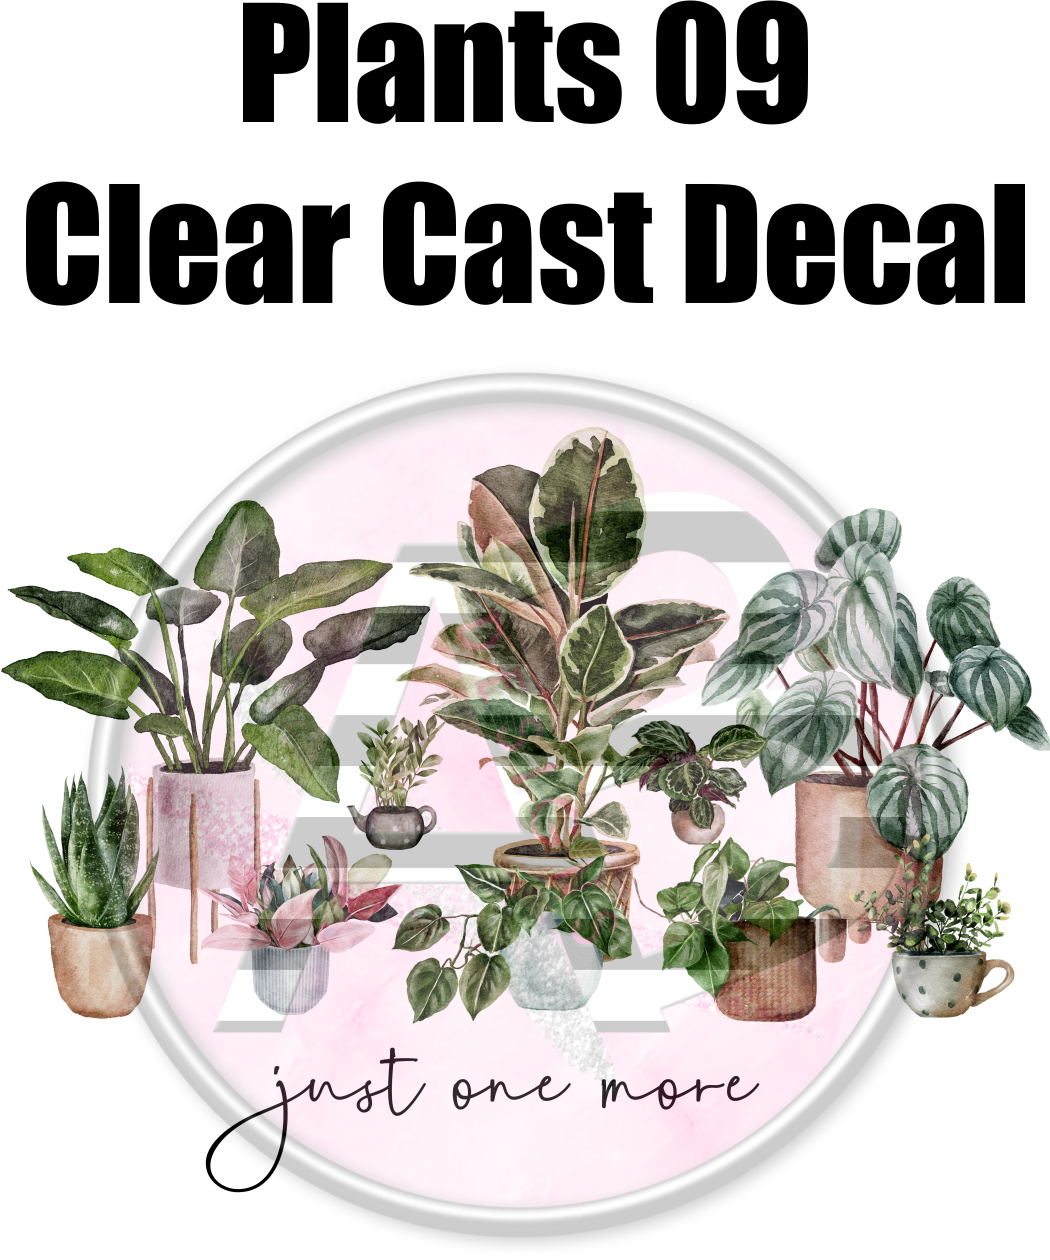 Plants 09 - Clear Cast Decal - 126